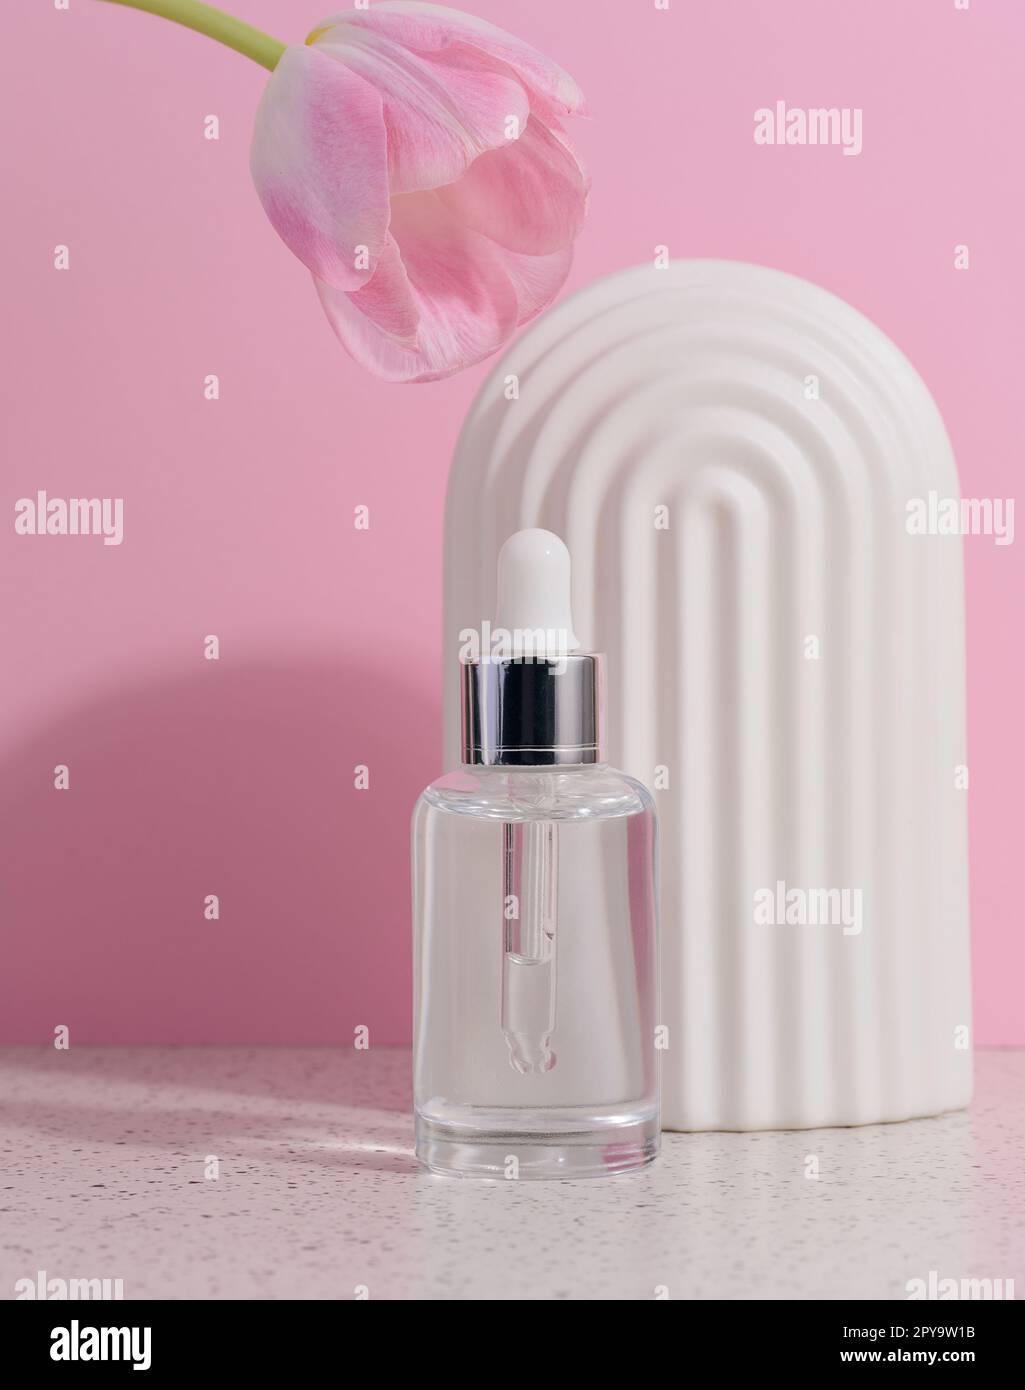 Clear glass dropper bottle with cosmetic product Stock Photo